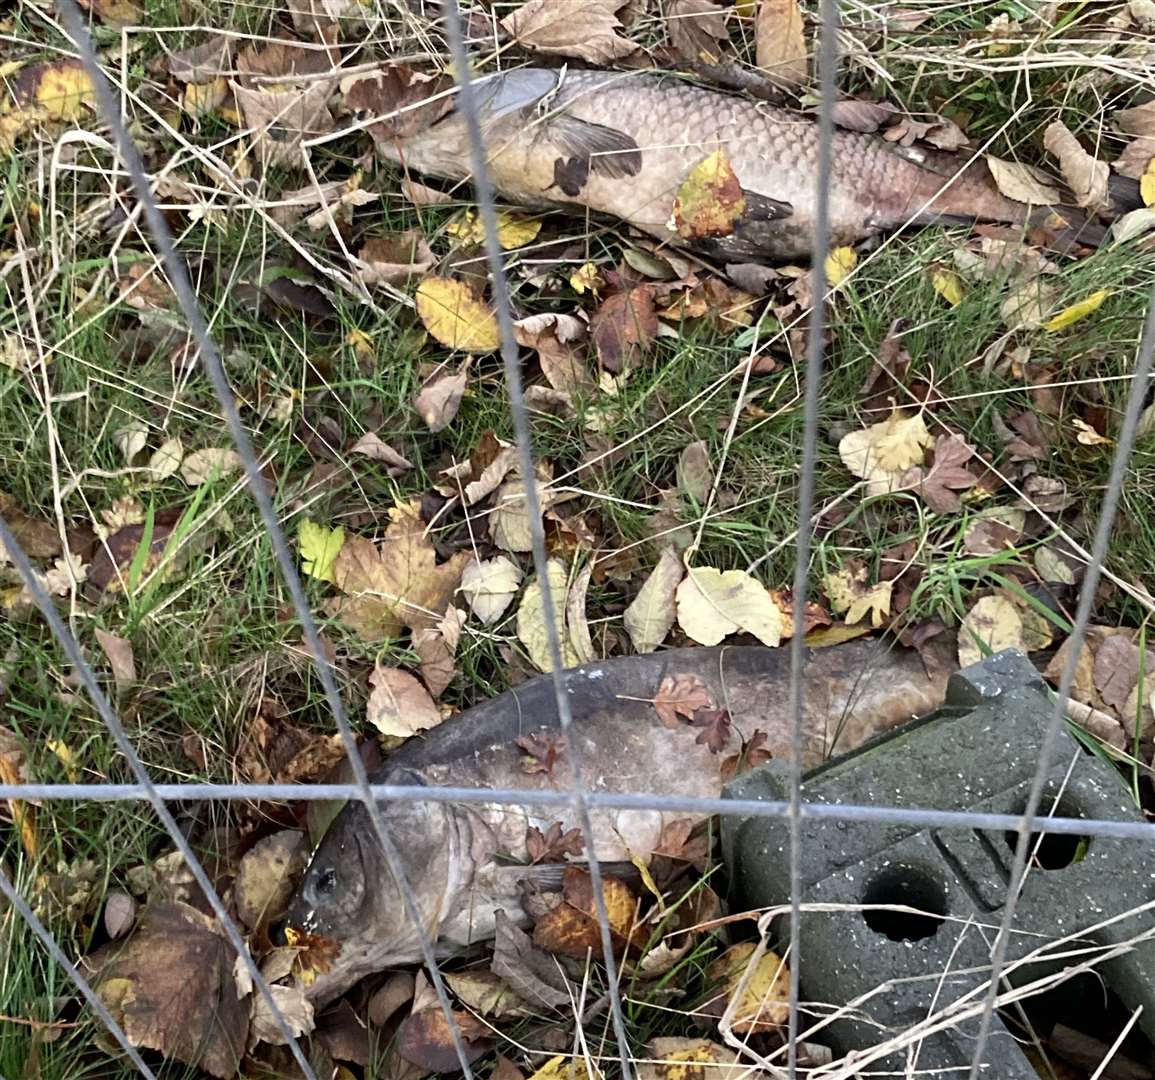 Two dead fish have been put on the bank of the pond, but residents are concerned this is a health hazard. Picture: Sue Pheby